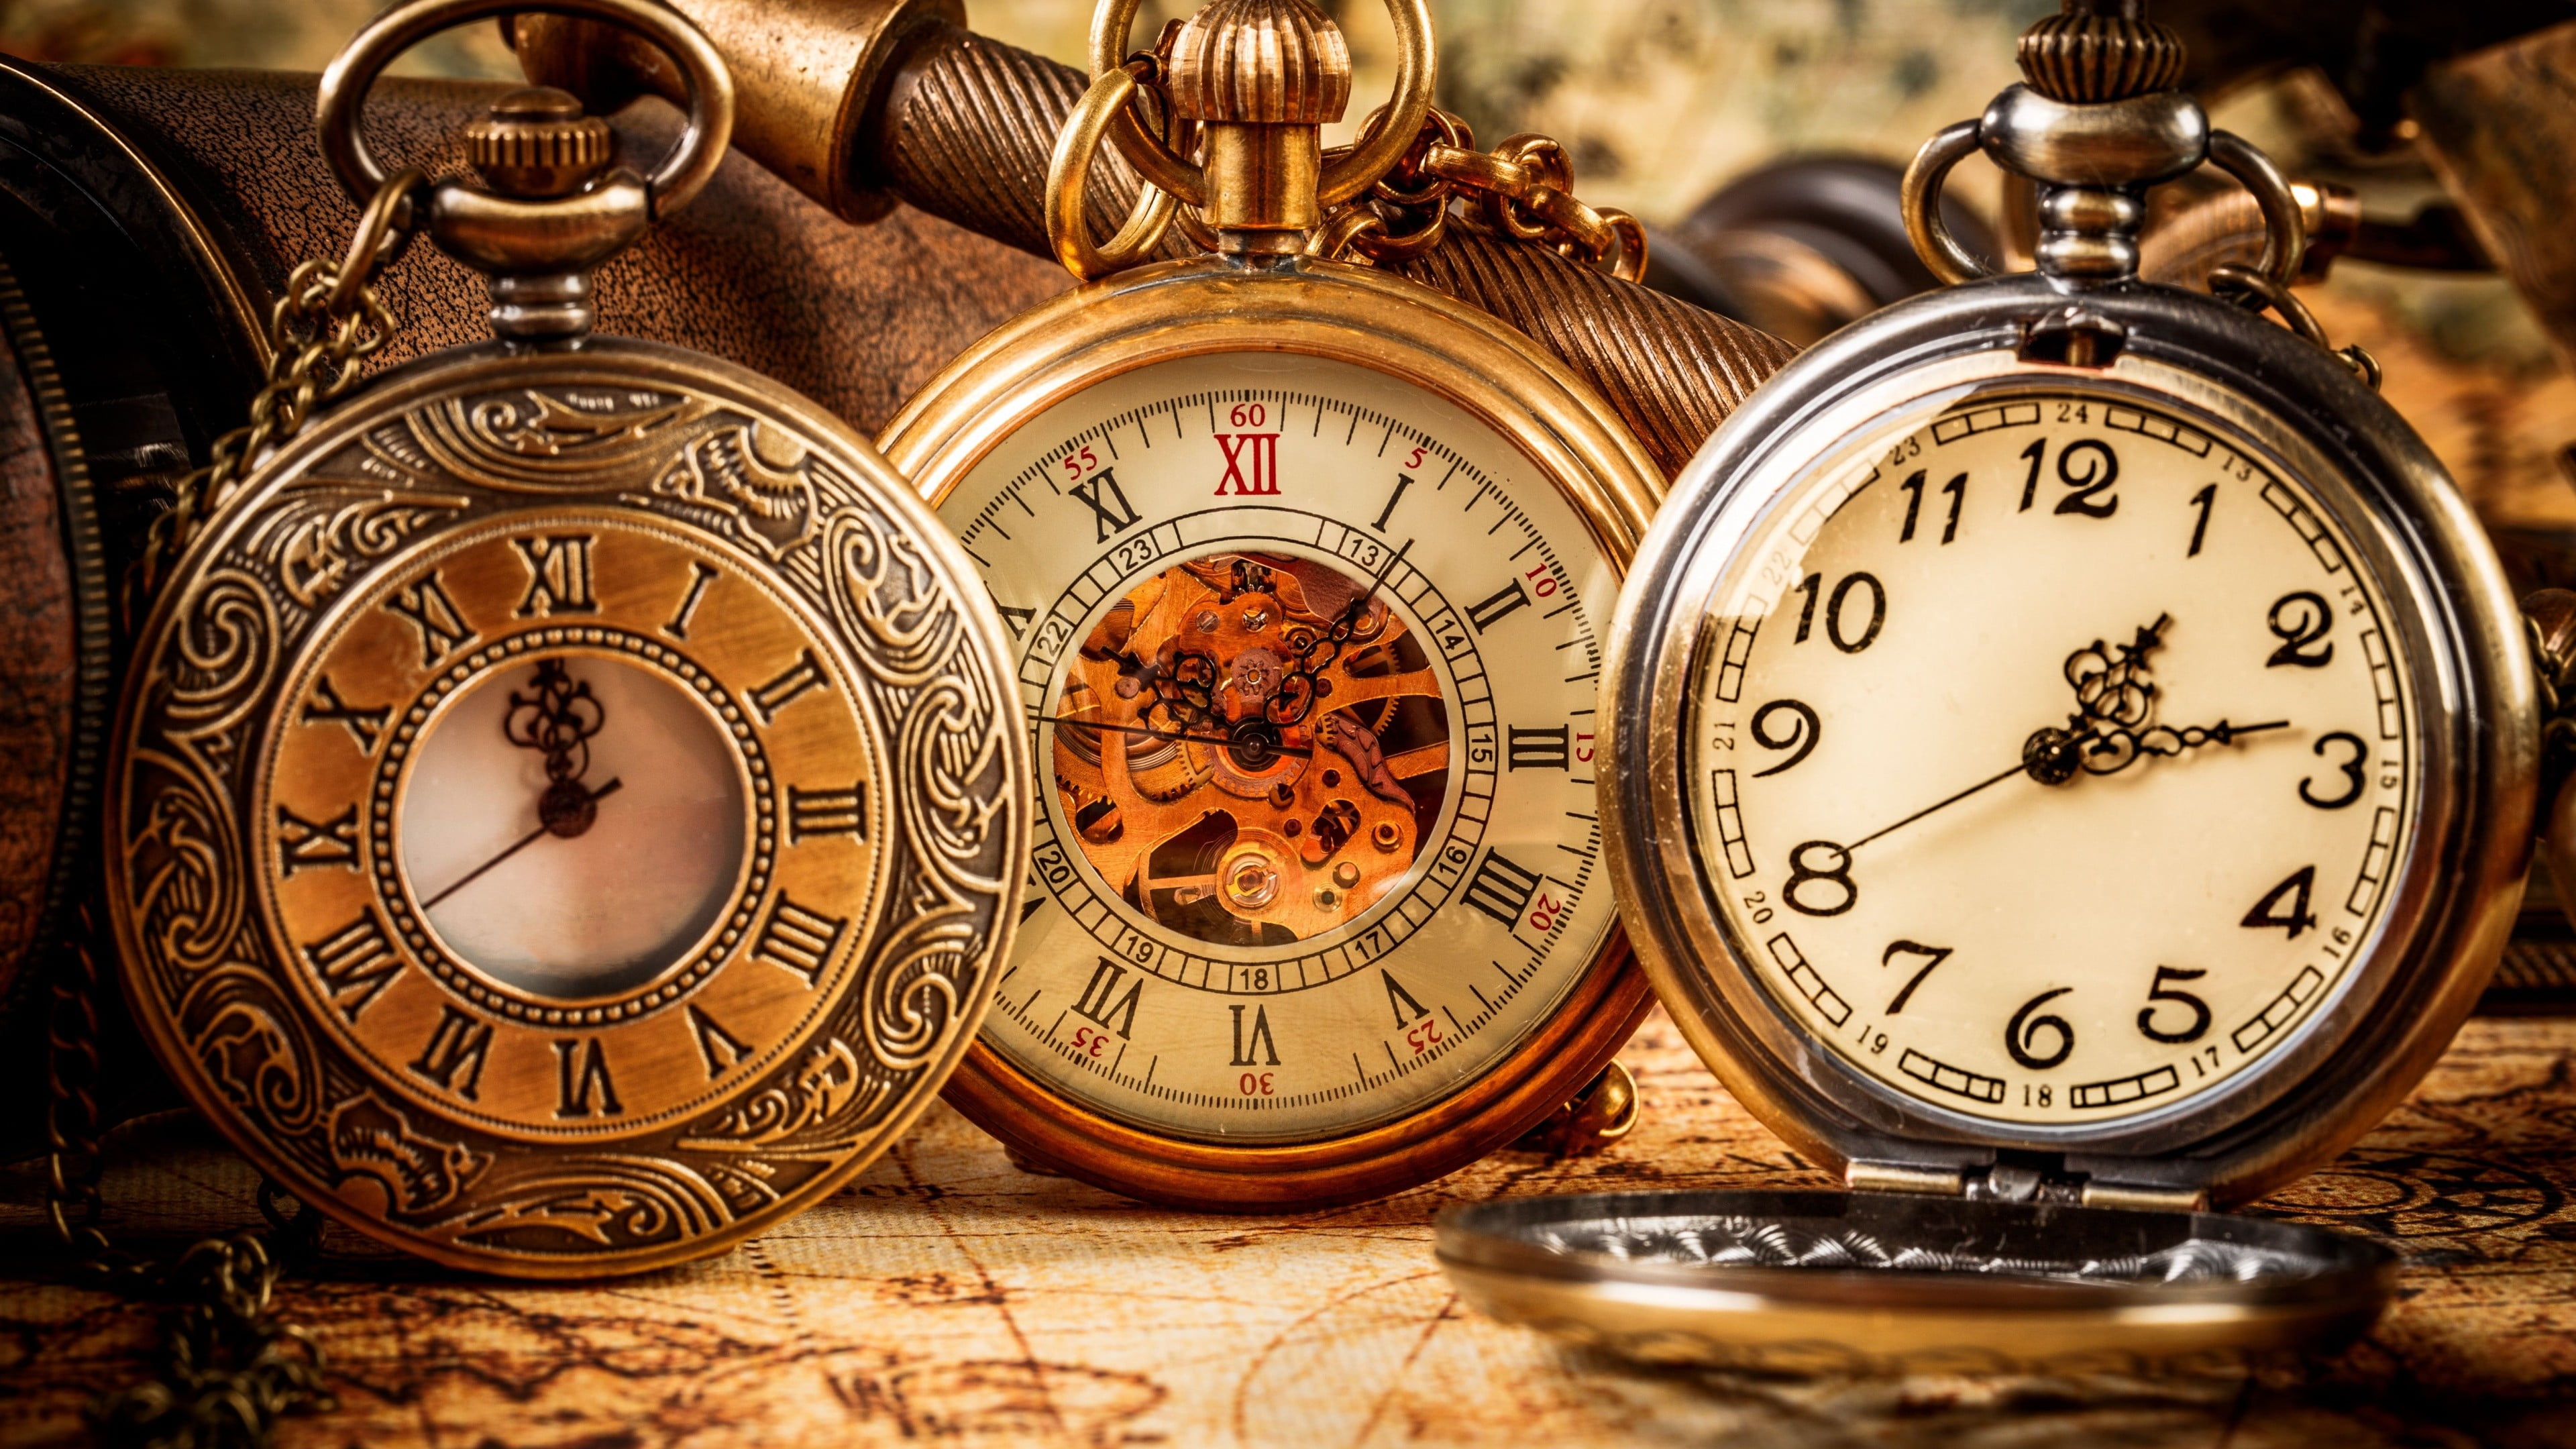 three silver-colored and gold-colored pocket watches, clocks